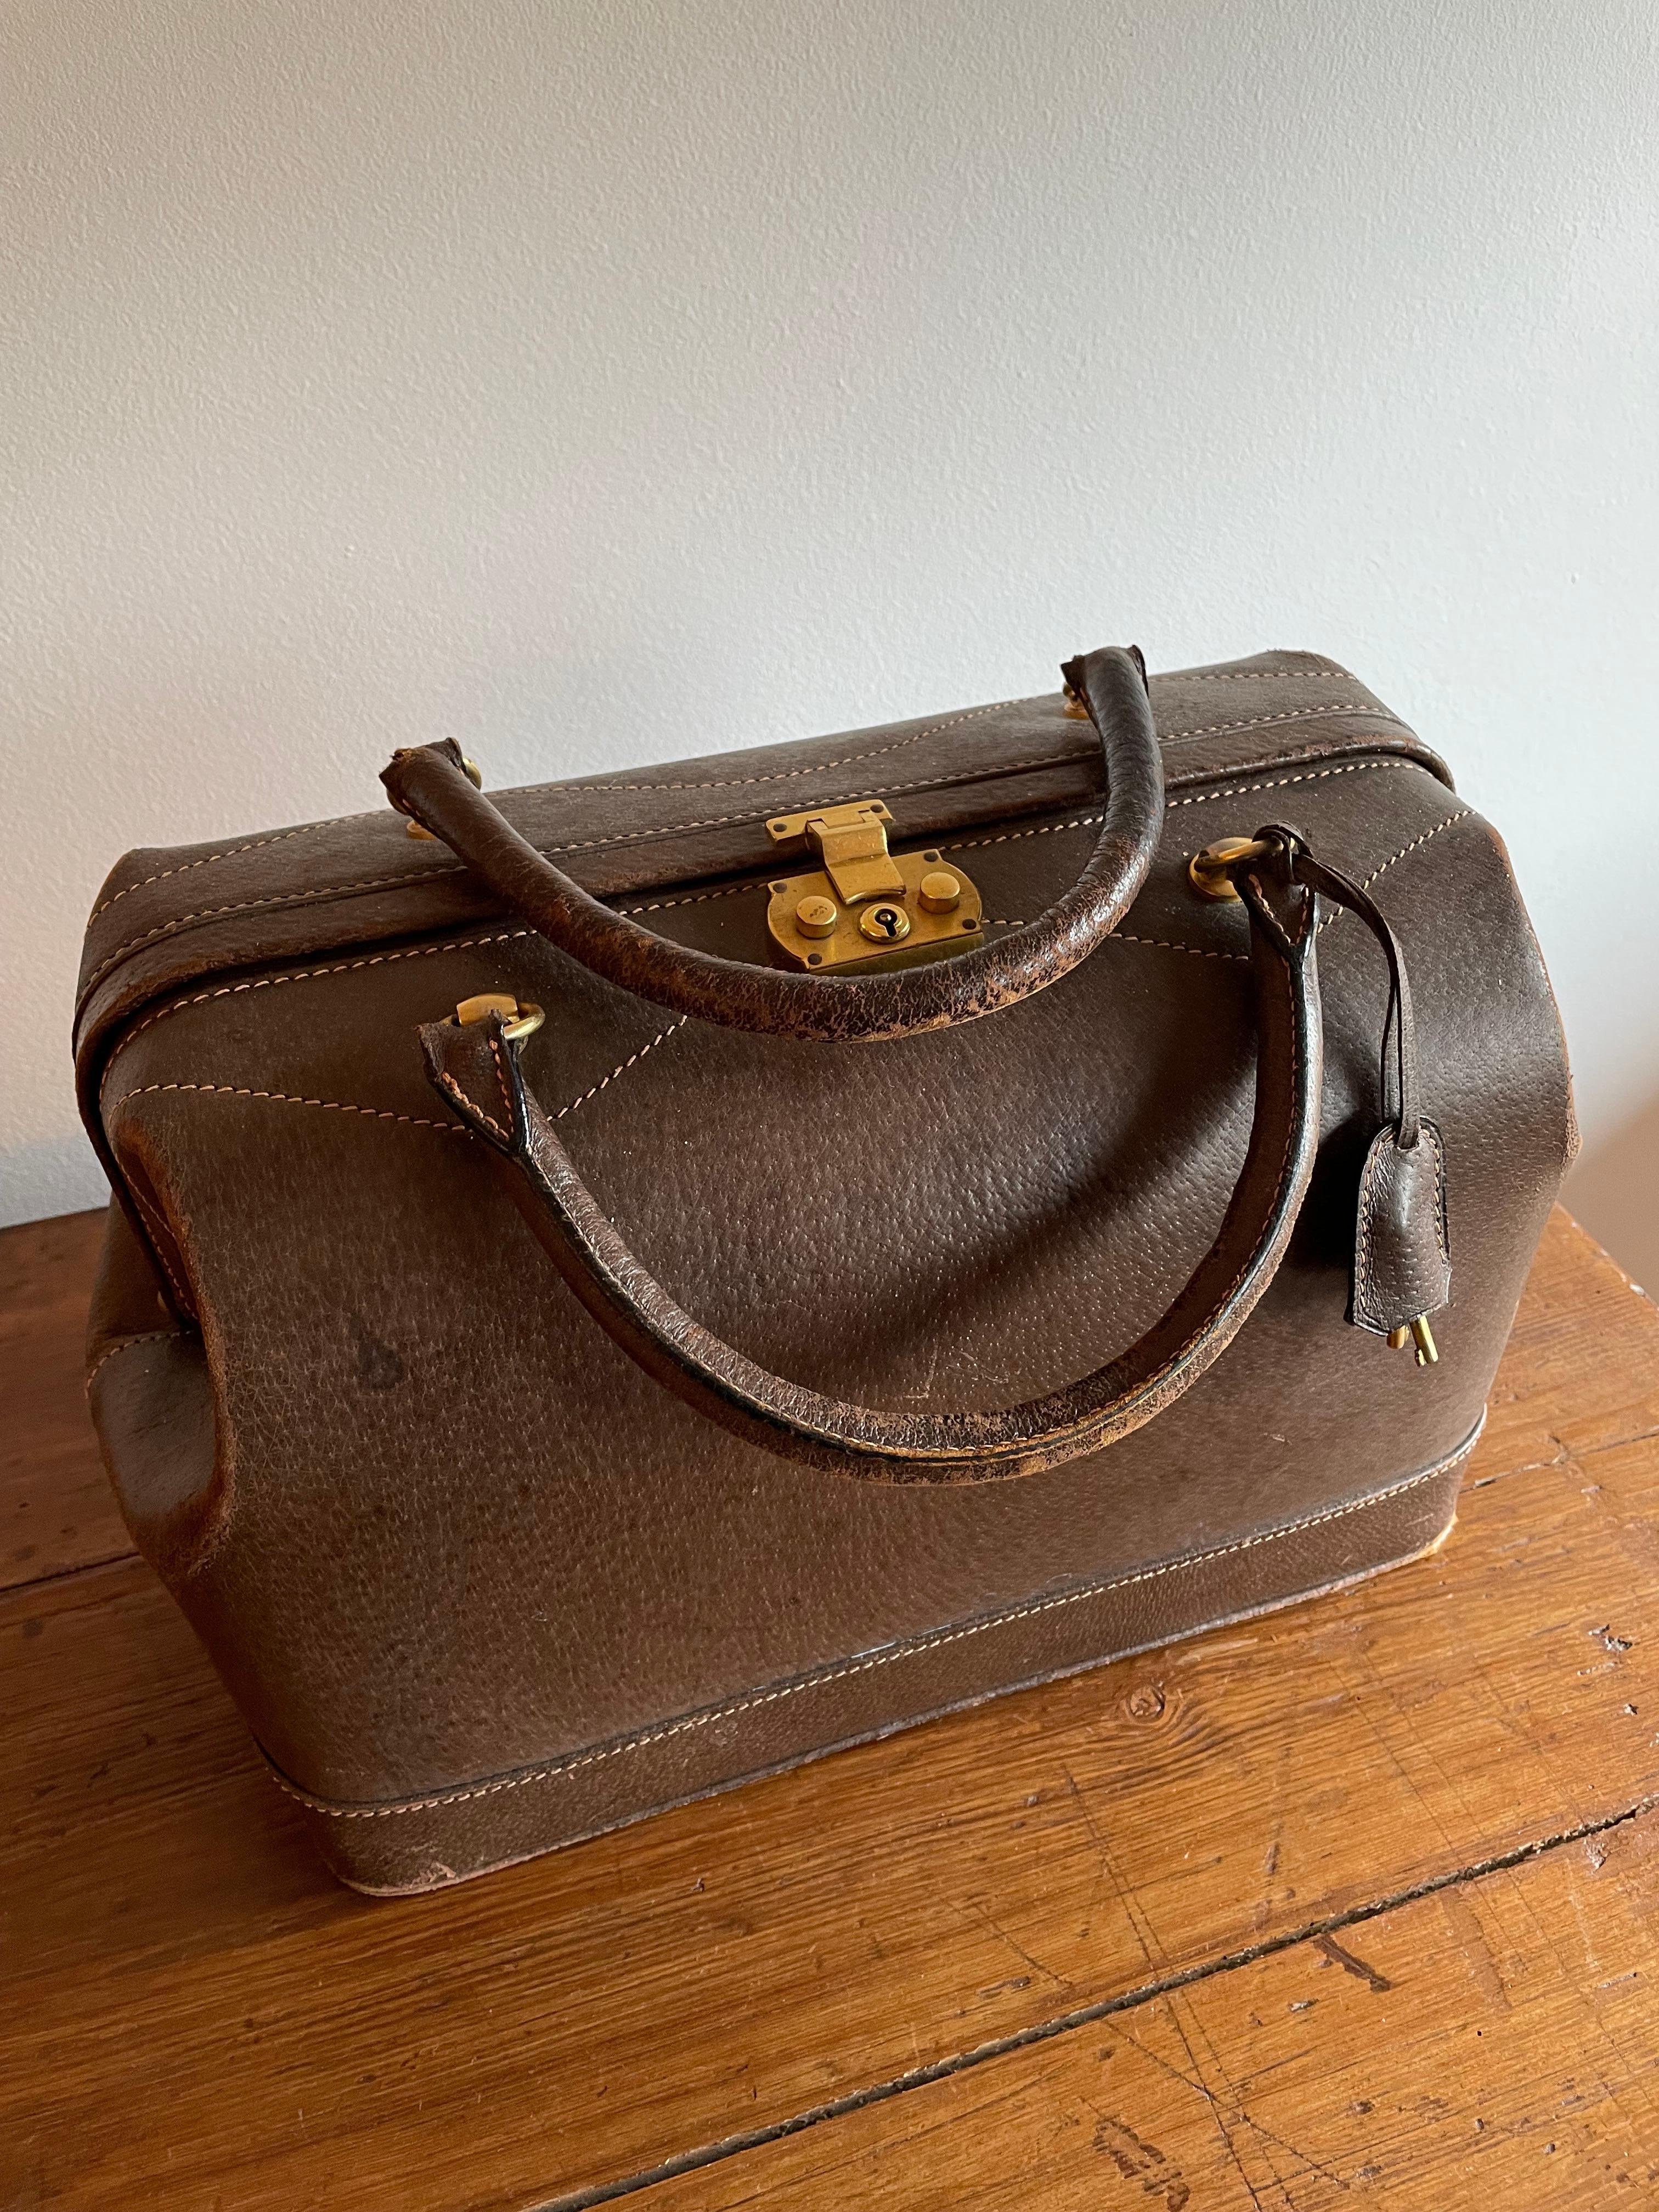 Gucci vintage 60s / 70s trunk in boar leather typical of those years. It has various signs of use as you can see and a handle has come off, but a good craftsman should have no problem fixing it.
Interlocking lock with padlock and original key.